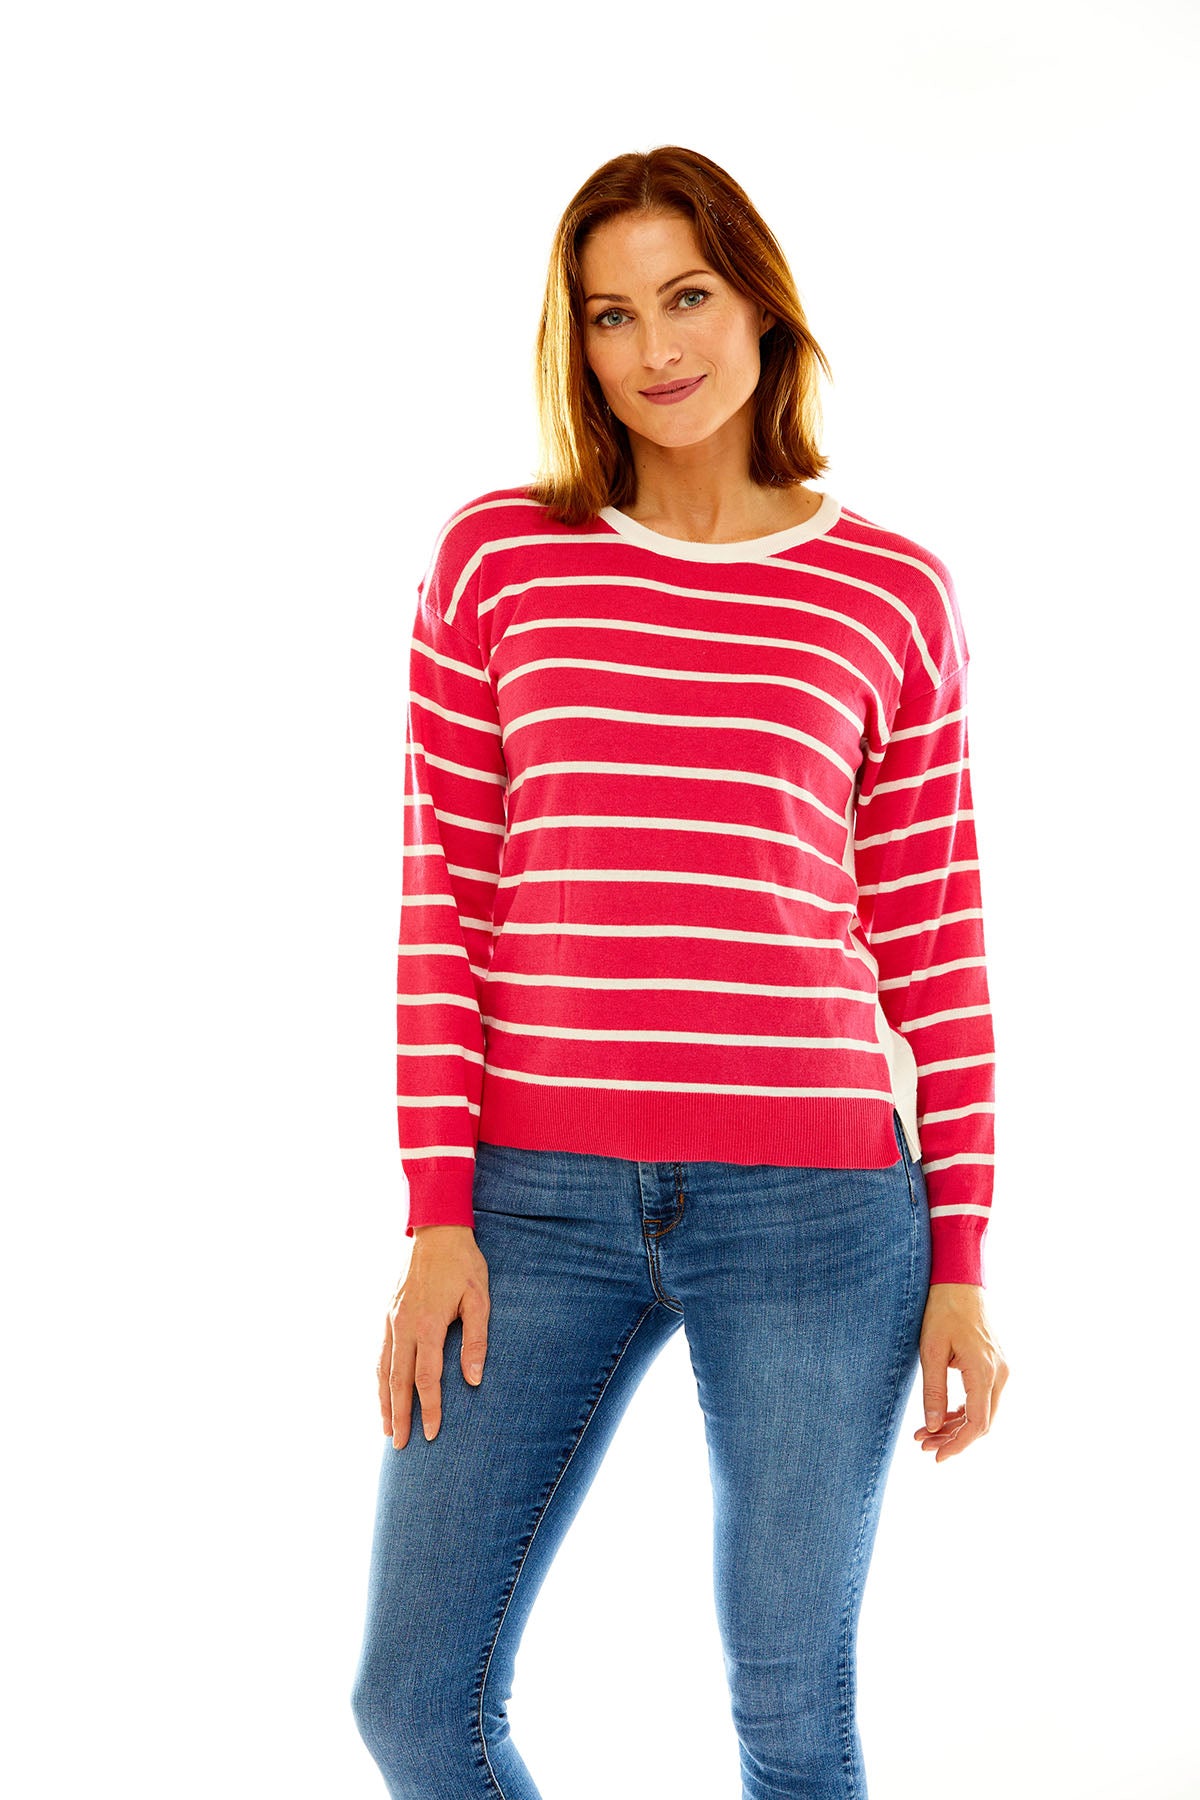 Woman in striped pullover sweater